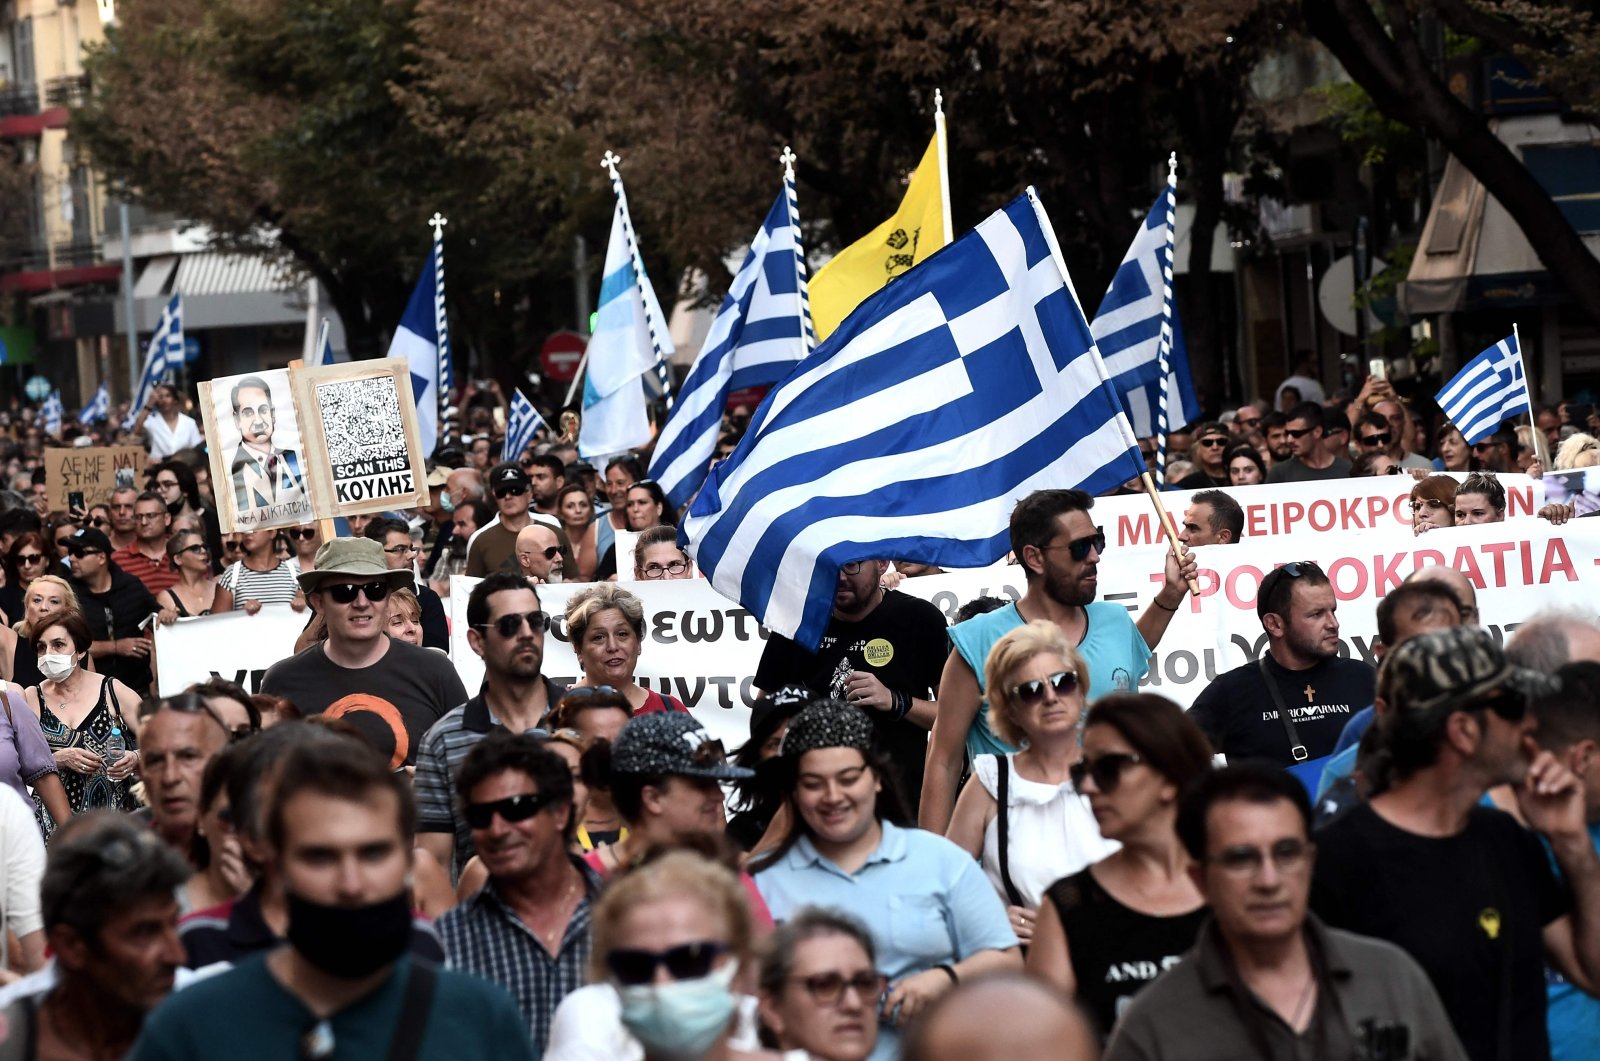 Anti-vaccine protesters take part in a rally in Thessaloniki, Greece, July 21, 2021. (AFP Photo)